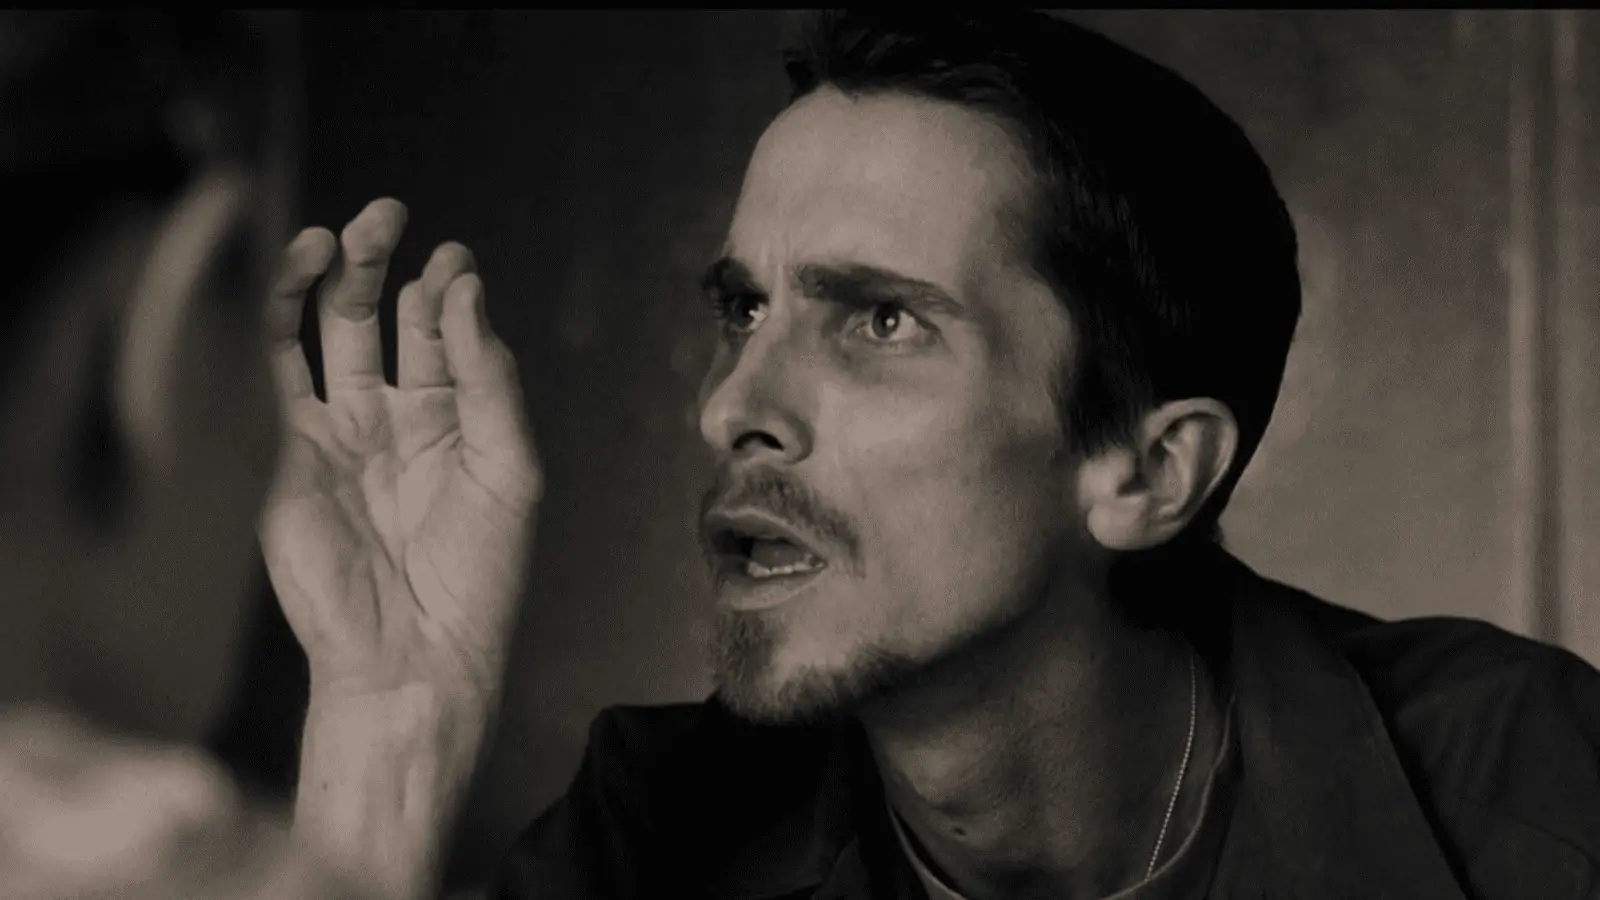 Scene from The Machinist